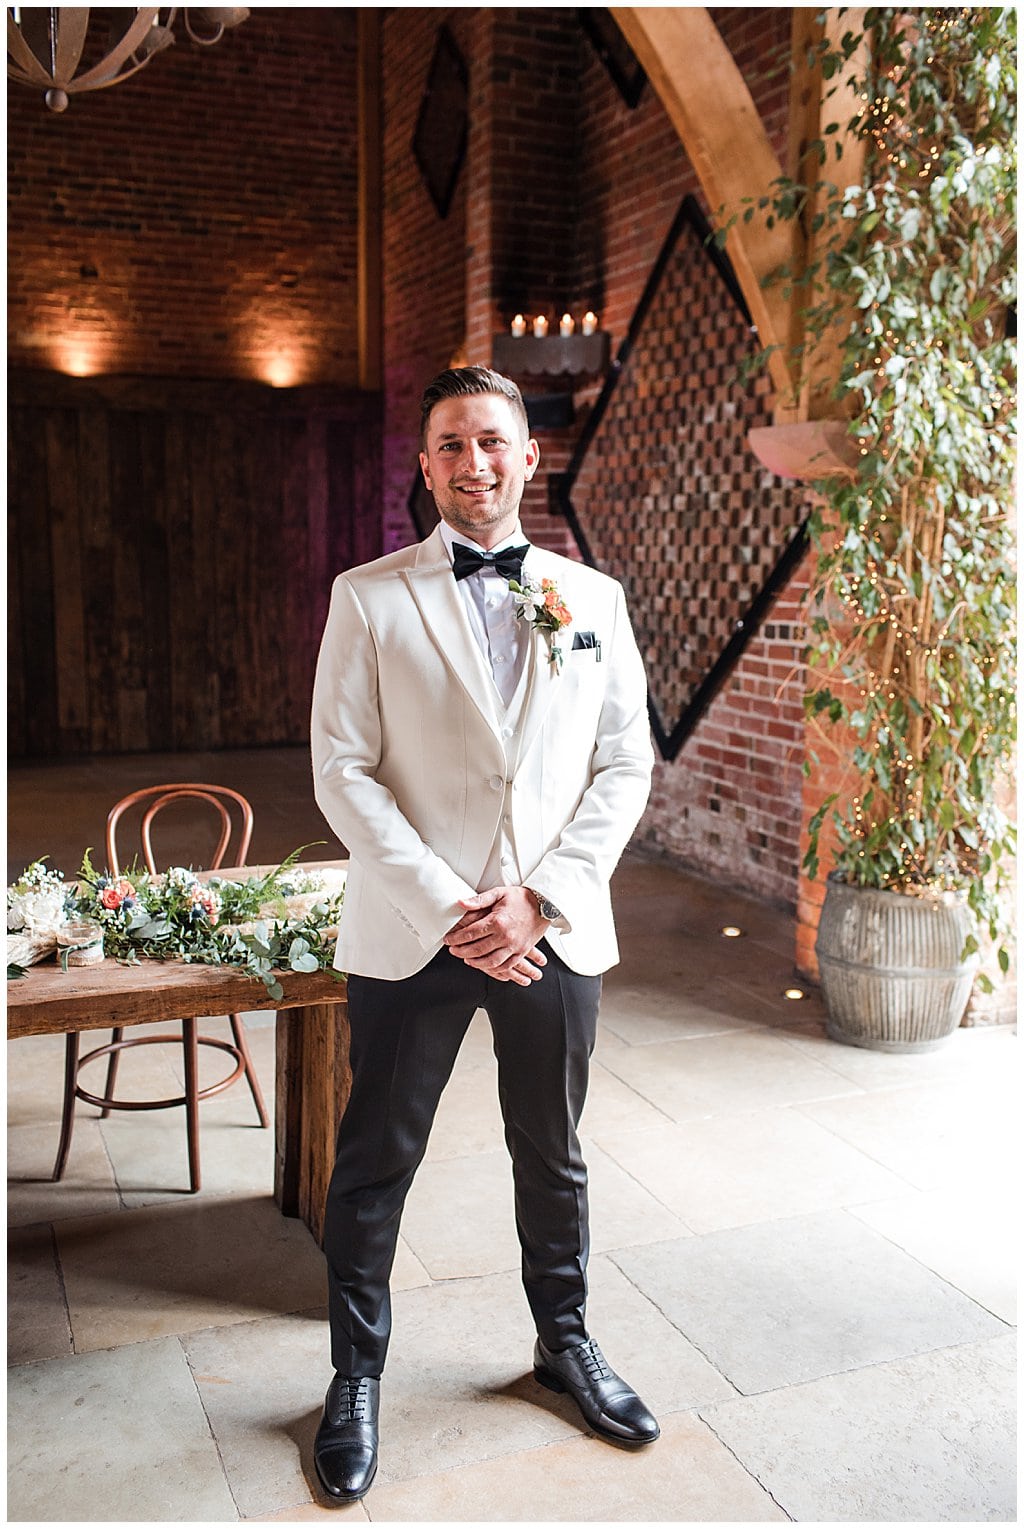 Groom wearing white tuxedo and black bow tie, stands waiting for Bride at Shustoke Barn ceremony